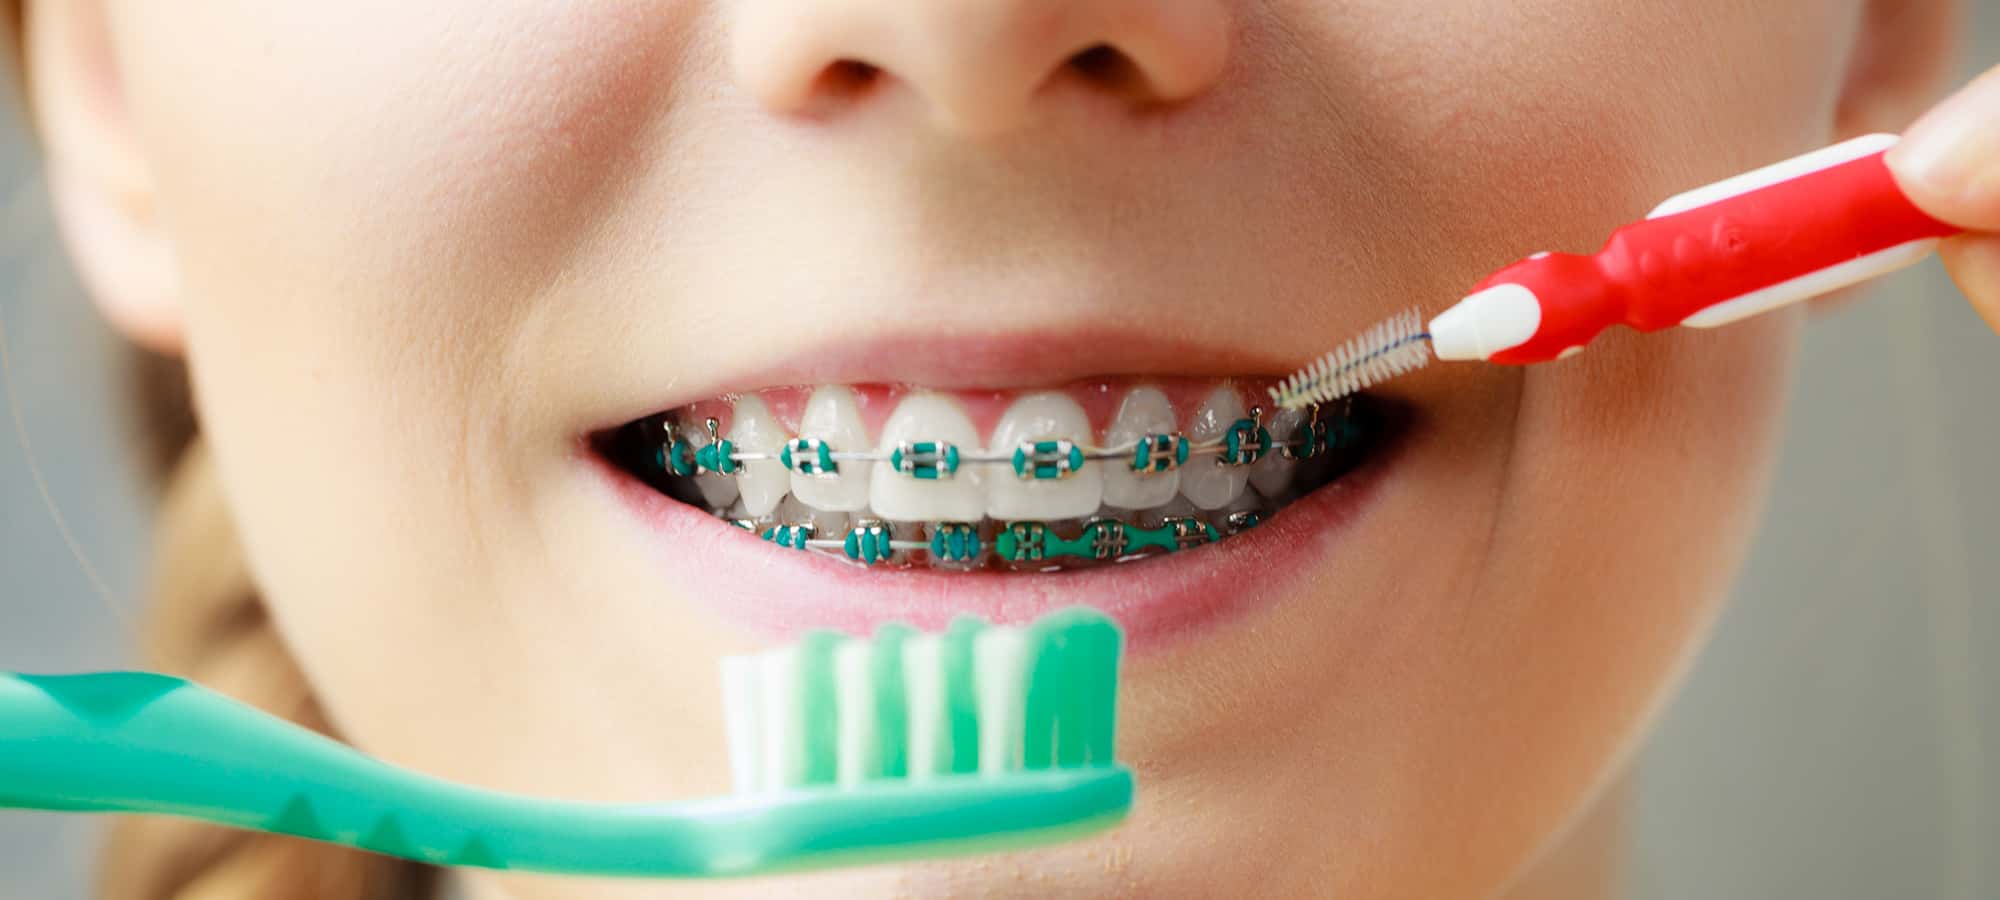 Ensuring Your Child is Taking Care of Their Braces